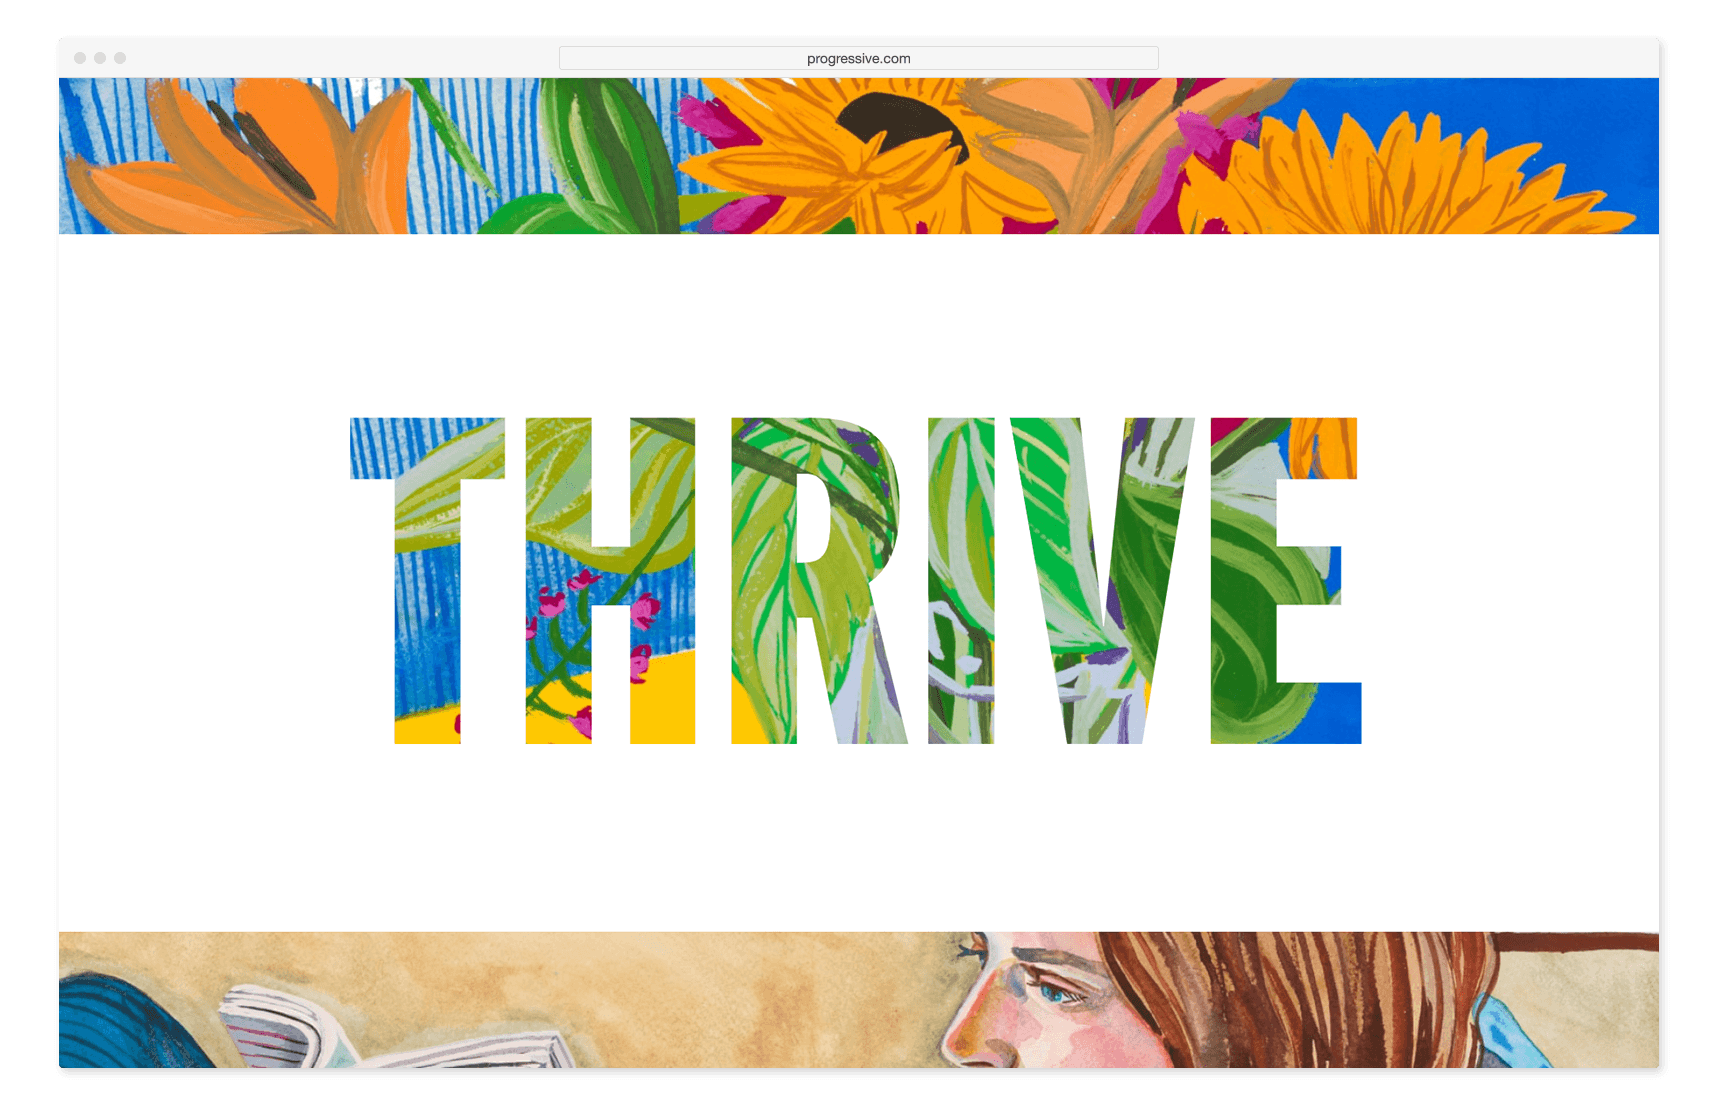 A web browser from The Progressive Corporation Annual Report 2020 showing a large white panel with the word THRIVE cut out of it, with hints of a colorful painting peeking through the letterforms.